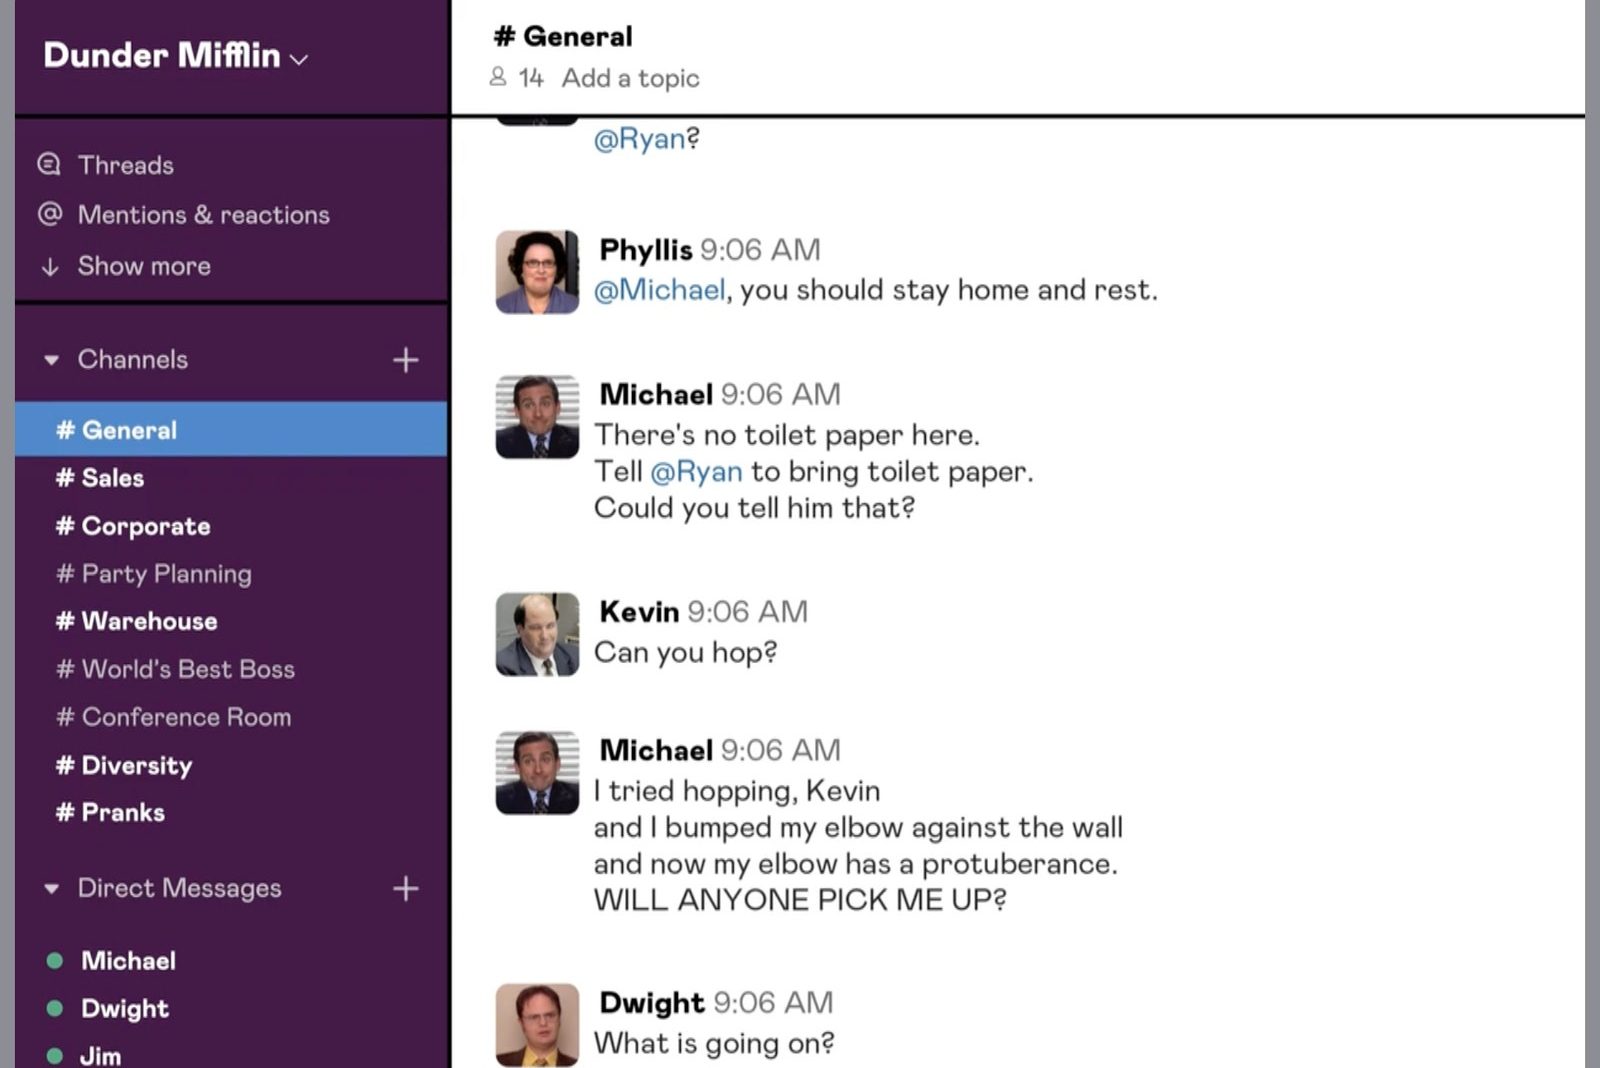 This Slack Workspace Recreates Episodes of “The Office” in Real-Time